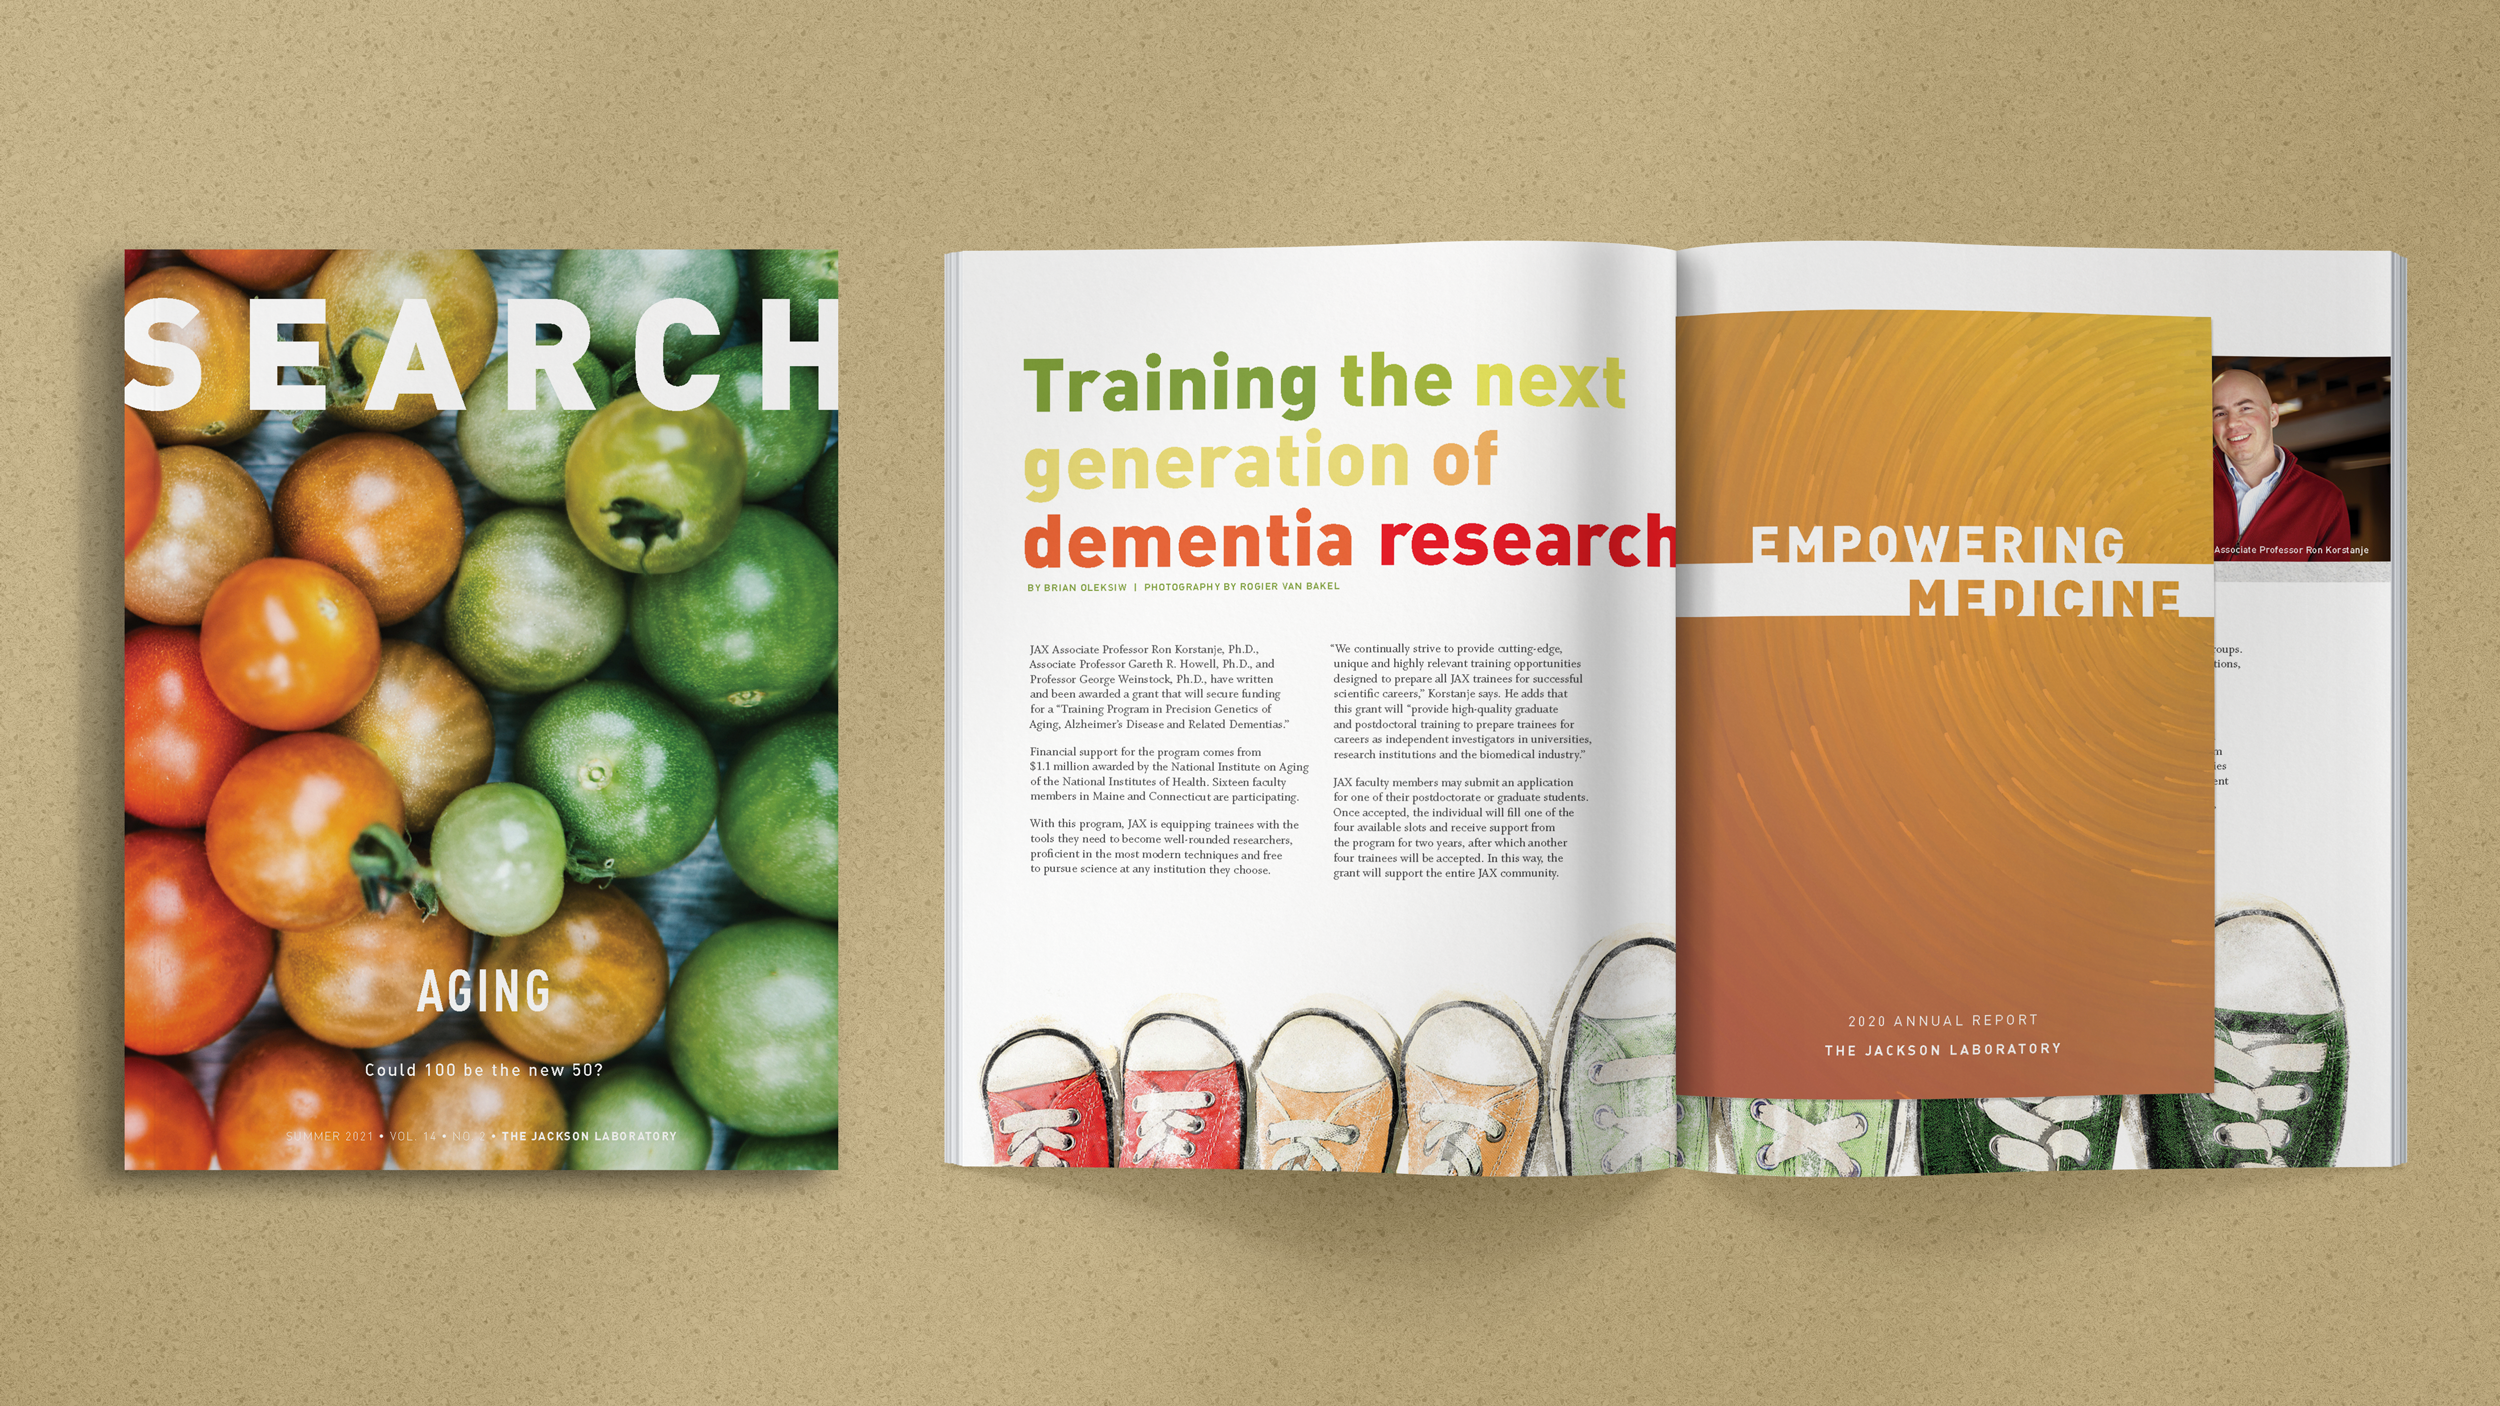 Search Magazine 14-2 Aging Research